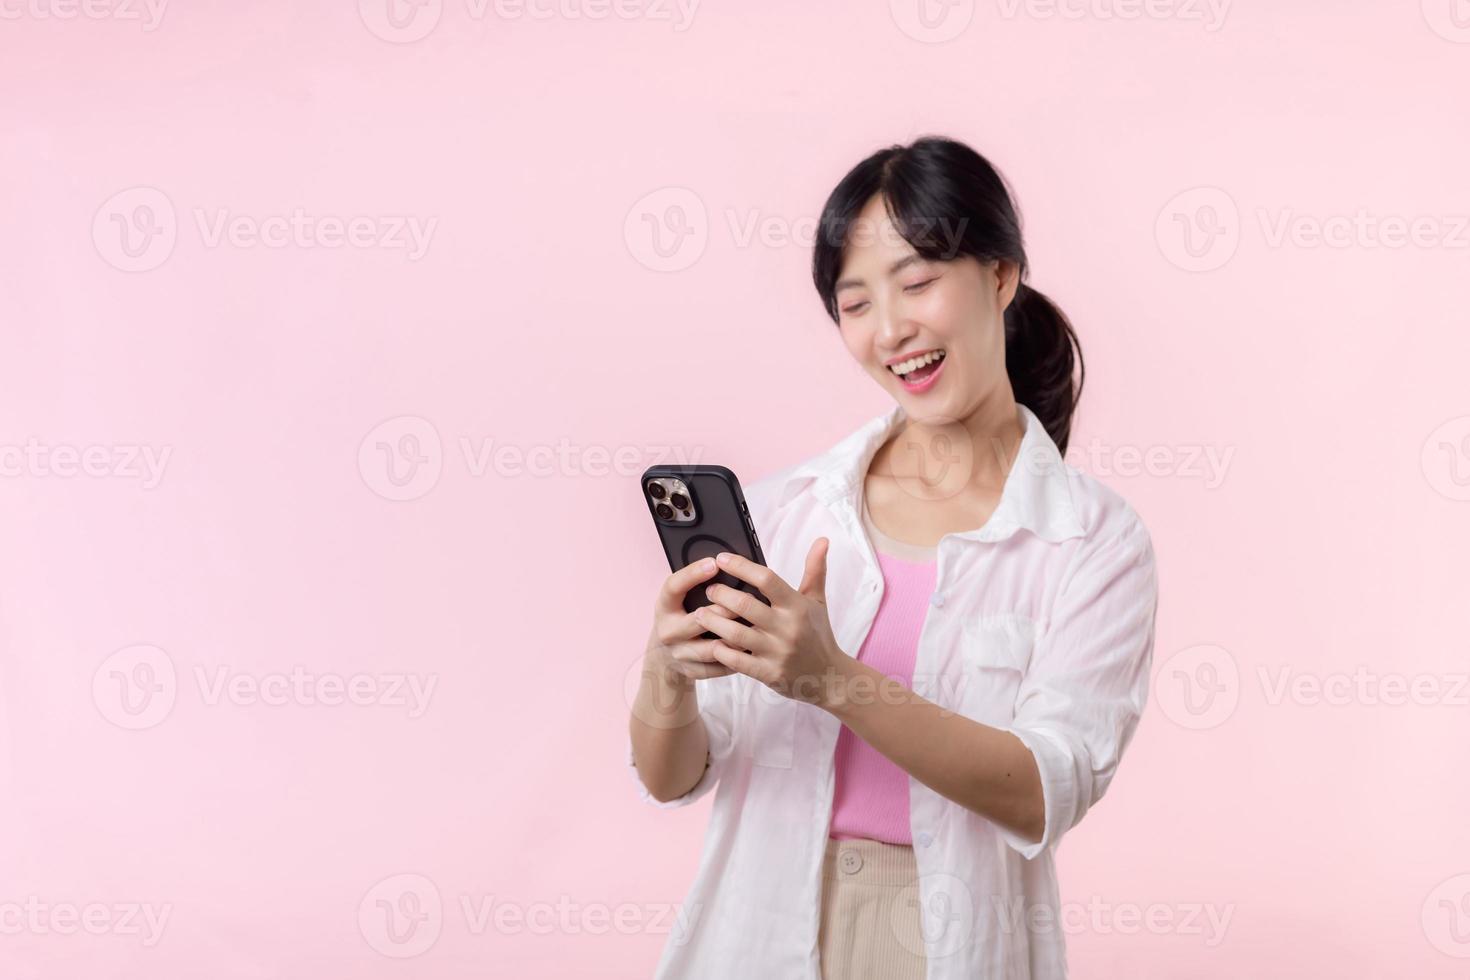 Pretty young asian woman showing success, victory hand gesture while receiving great news from smartphone on pink background. Happy technology, mobile phone advertisement, online application concept photo